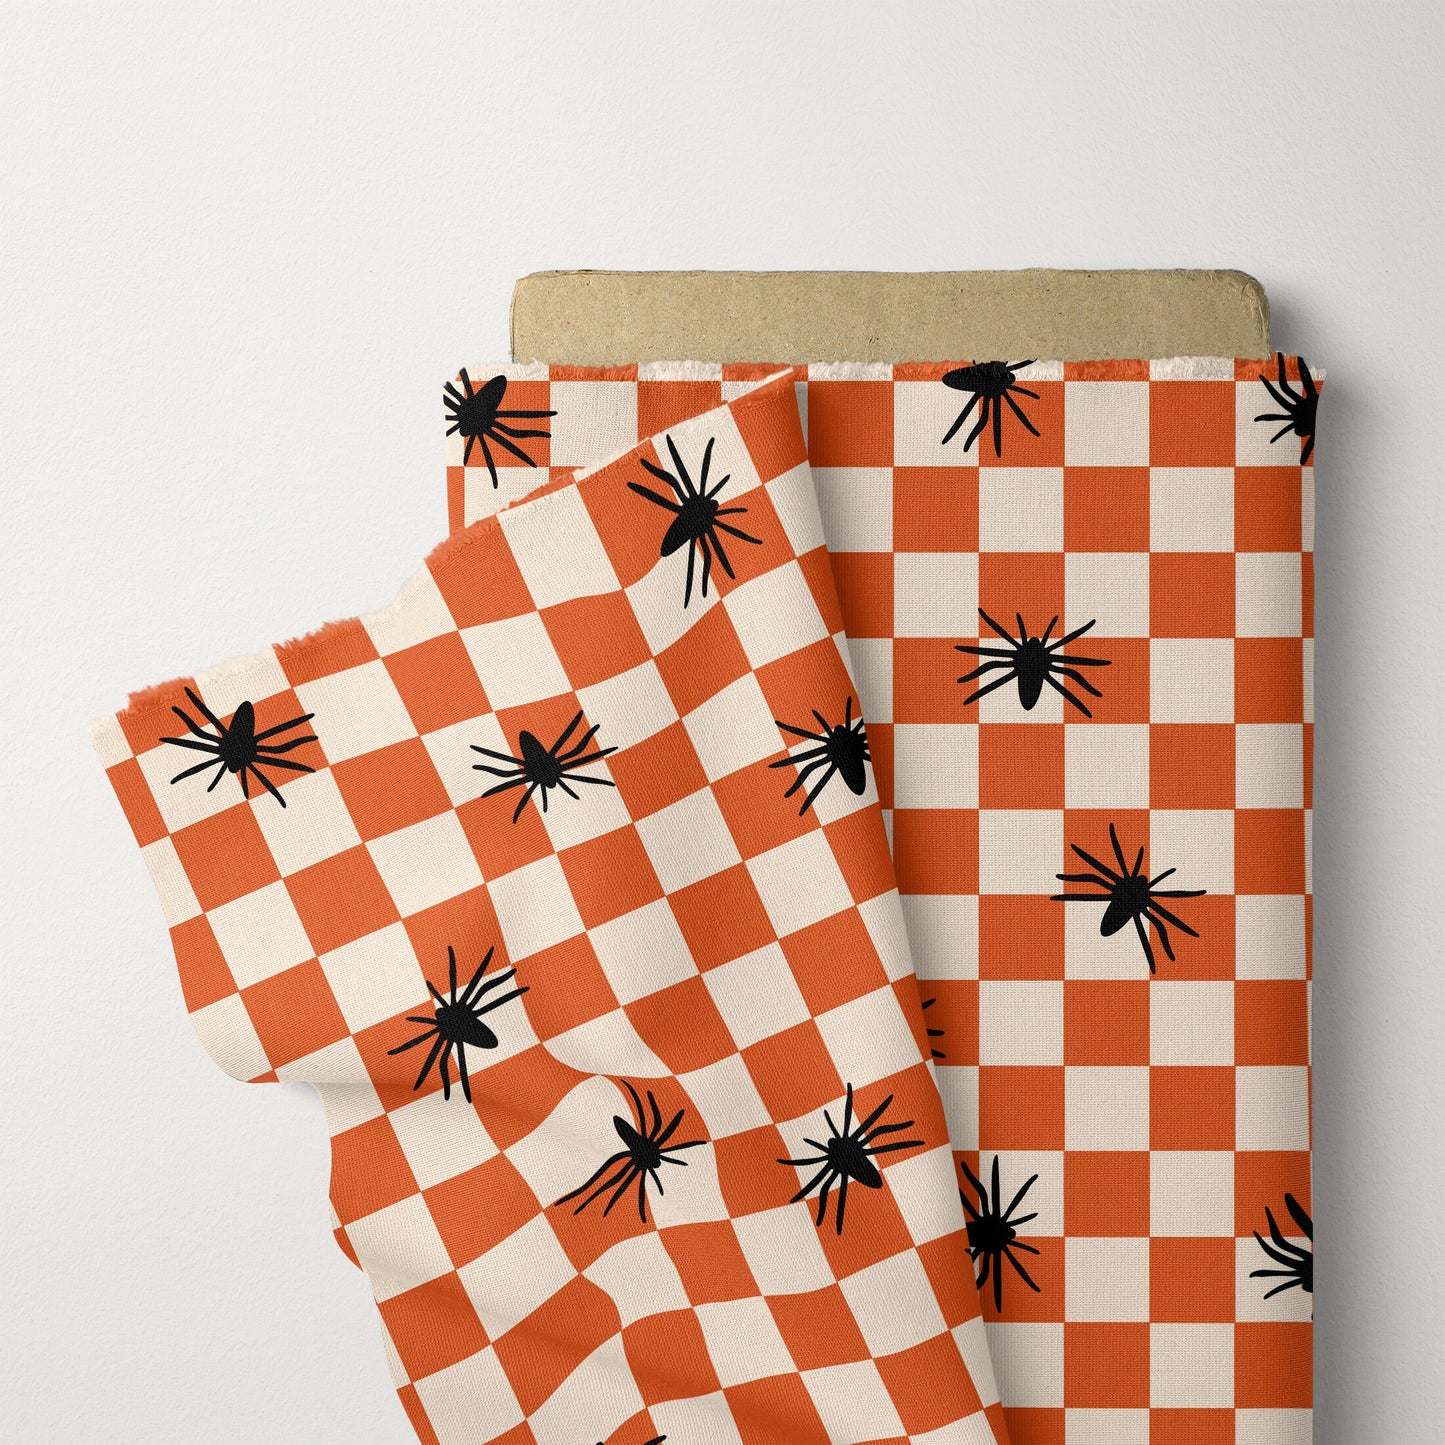 Halloween Pattern Spiders Checkerboard Seamless Repeat Pattern for Fabric Sublimation